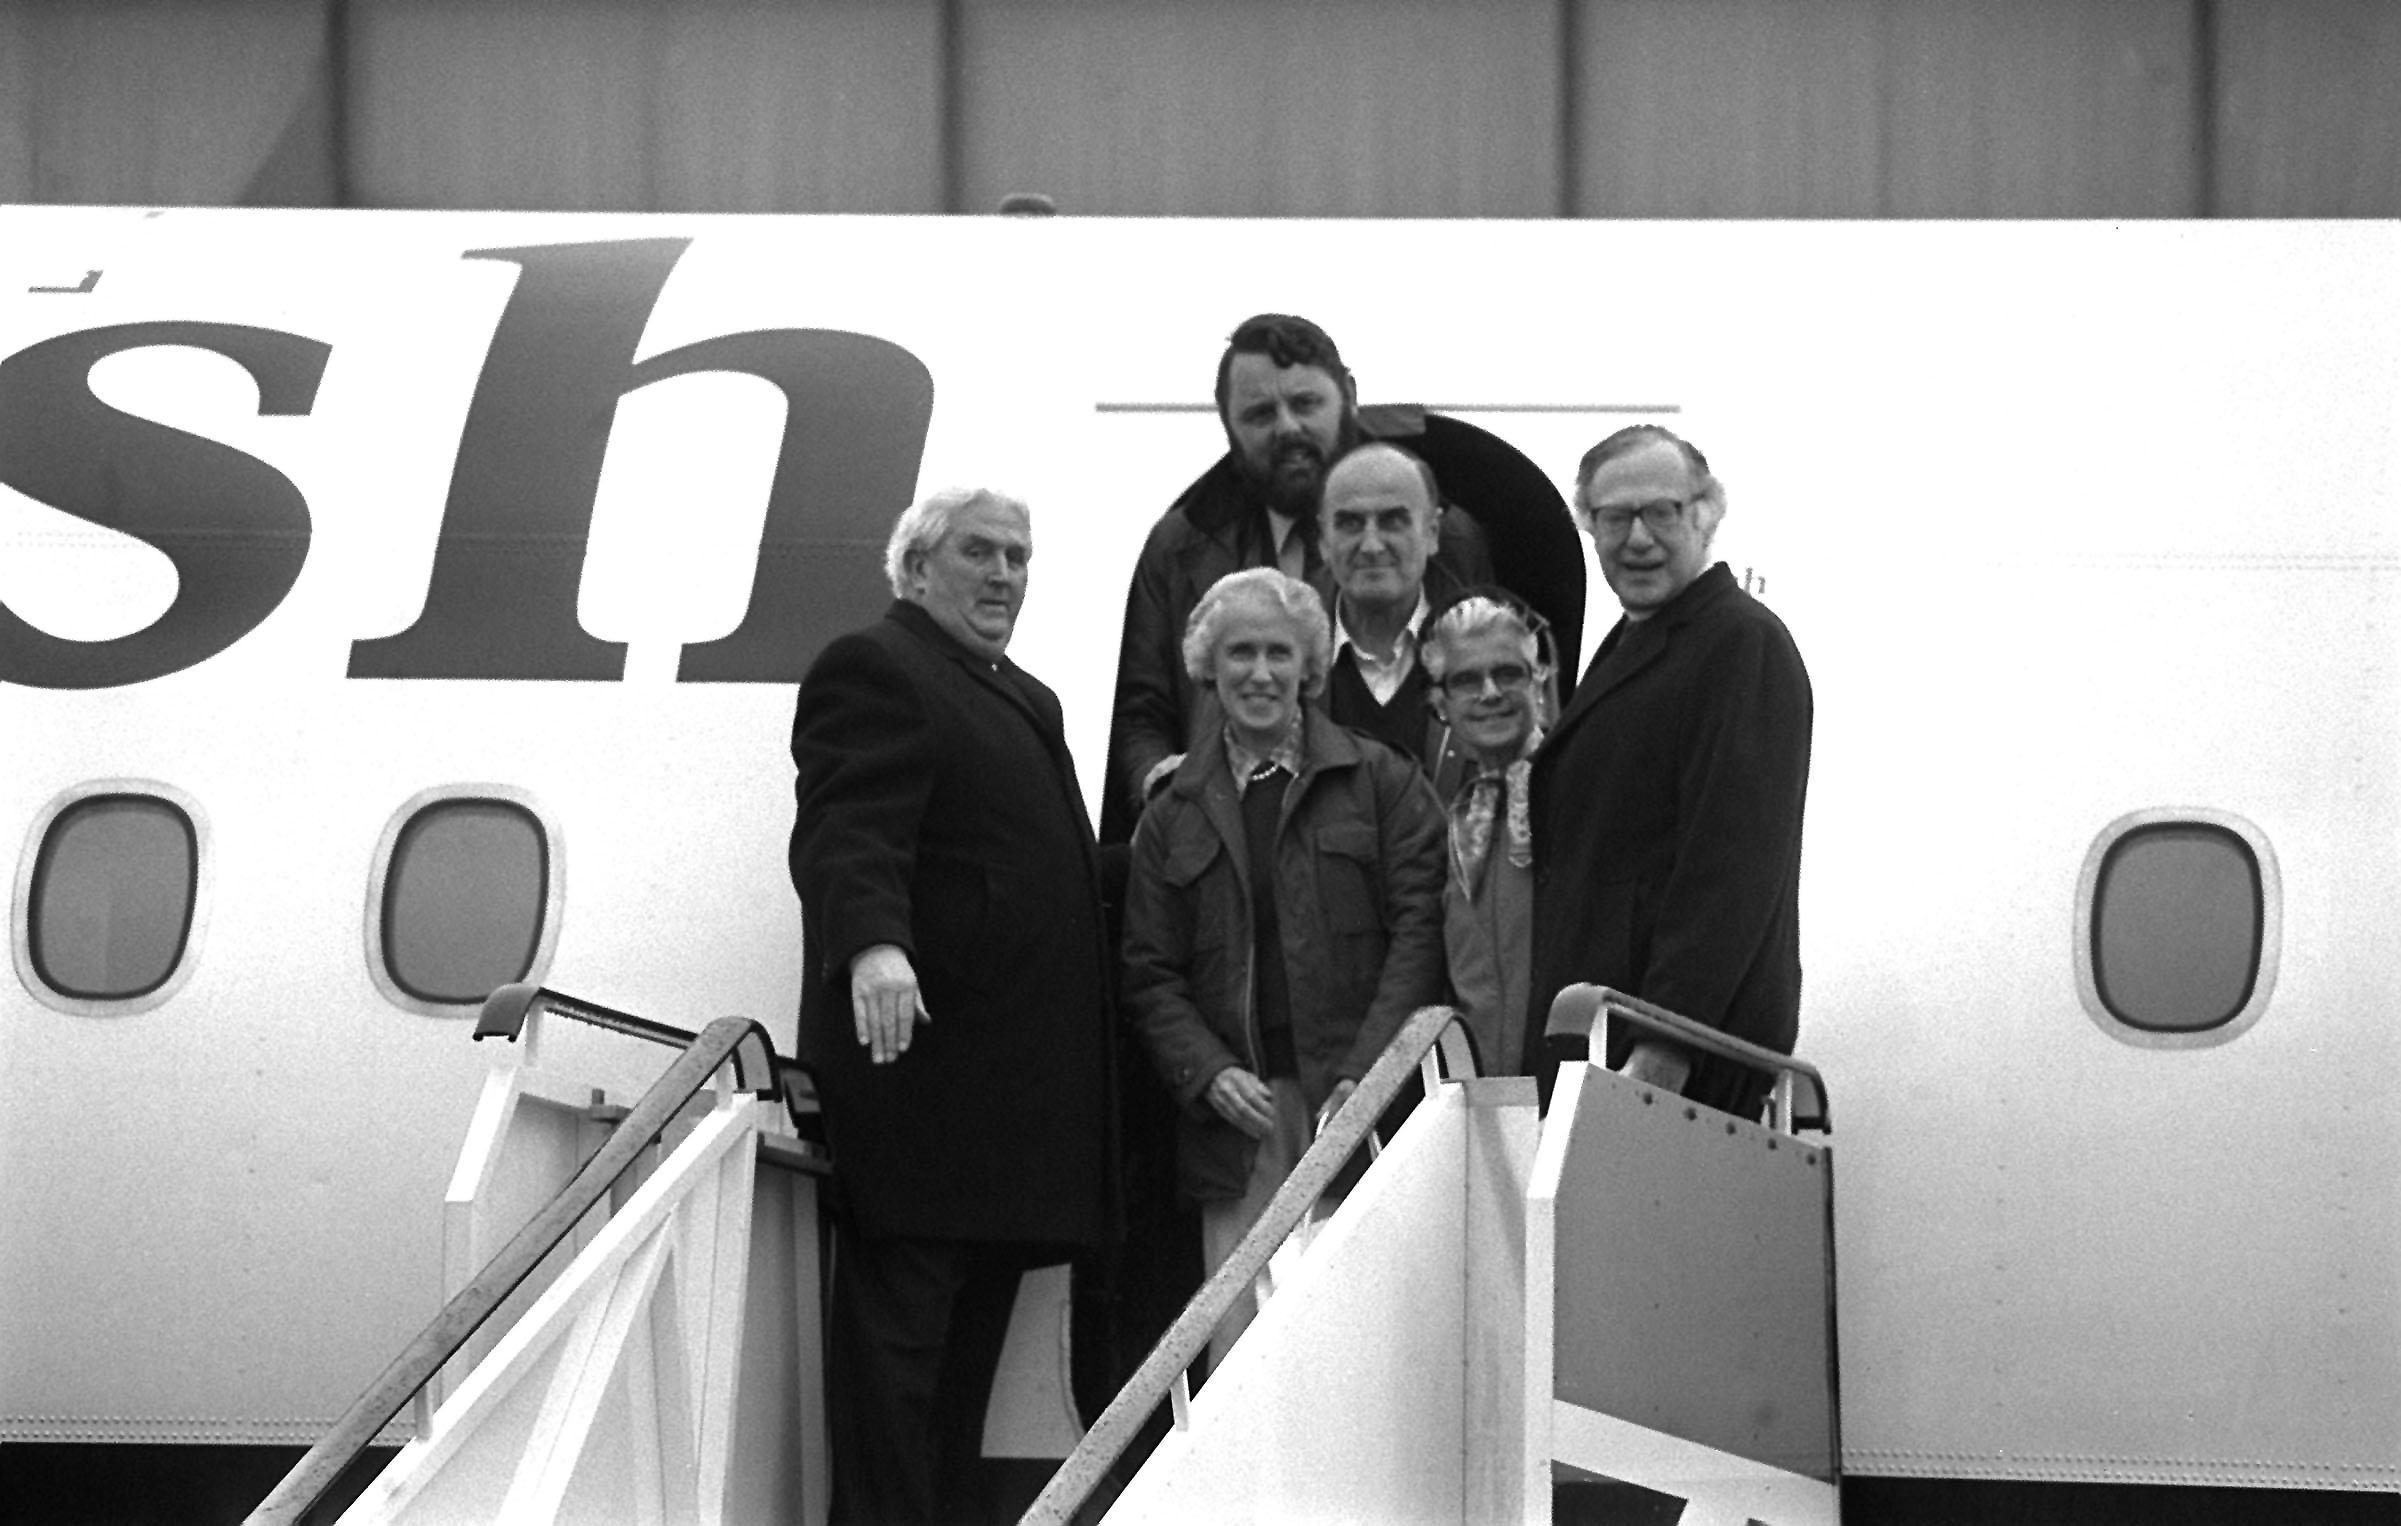 Miss Jean Waddell steps from the plane at Heathrow Airport after the release from captivity in Iran of the three Anglicans. Behind her is Mrs Audrey Coleman, with Dr John Coleman, her husband, Dr Runcie, the Archbishop of Canterbury and Terry Waite.